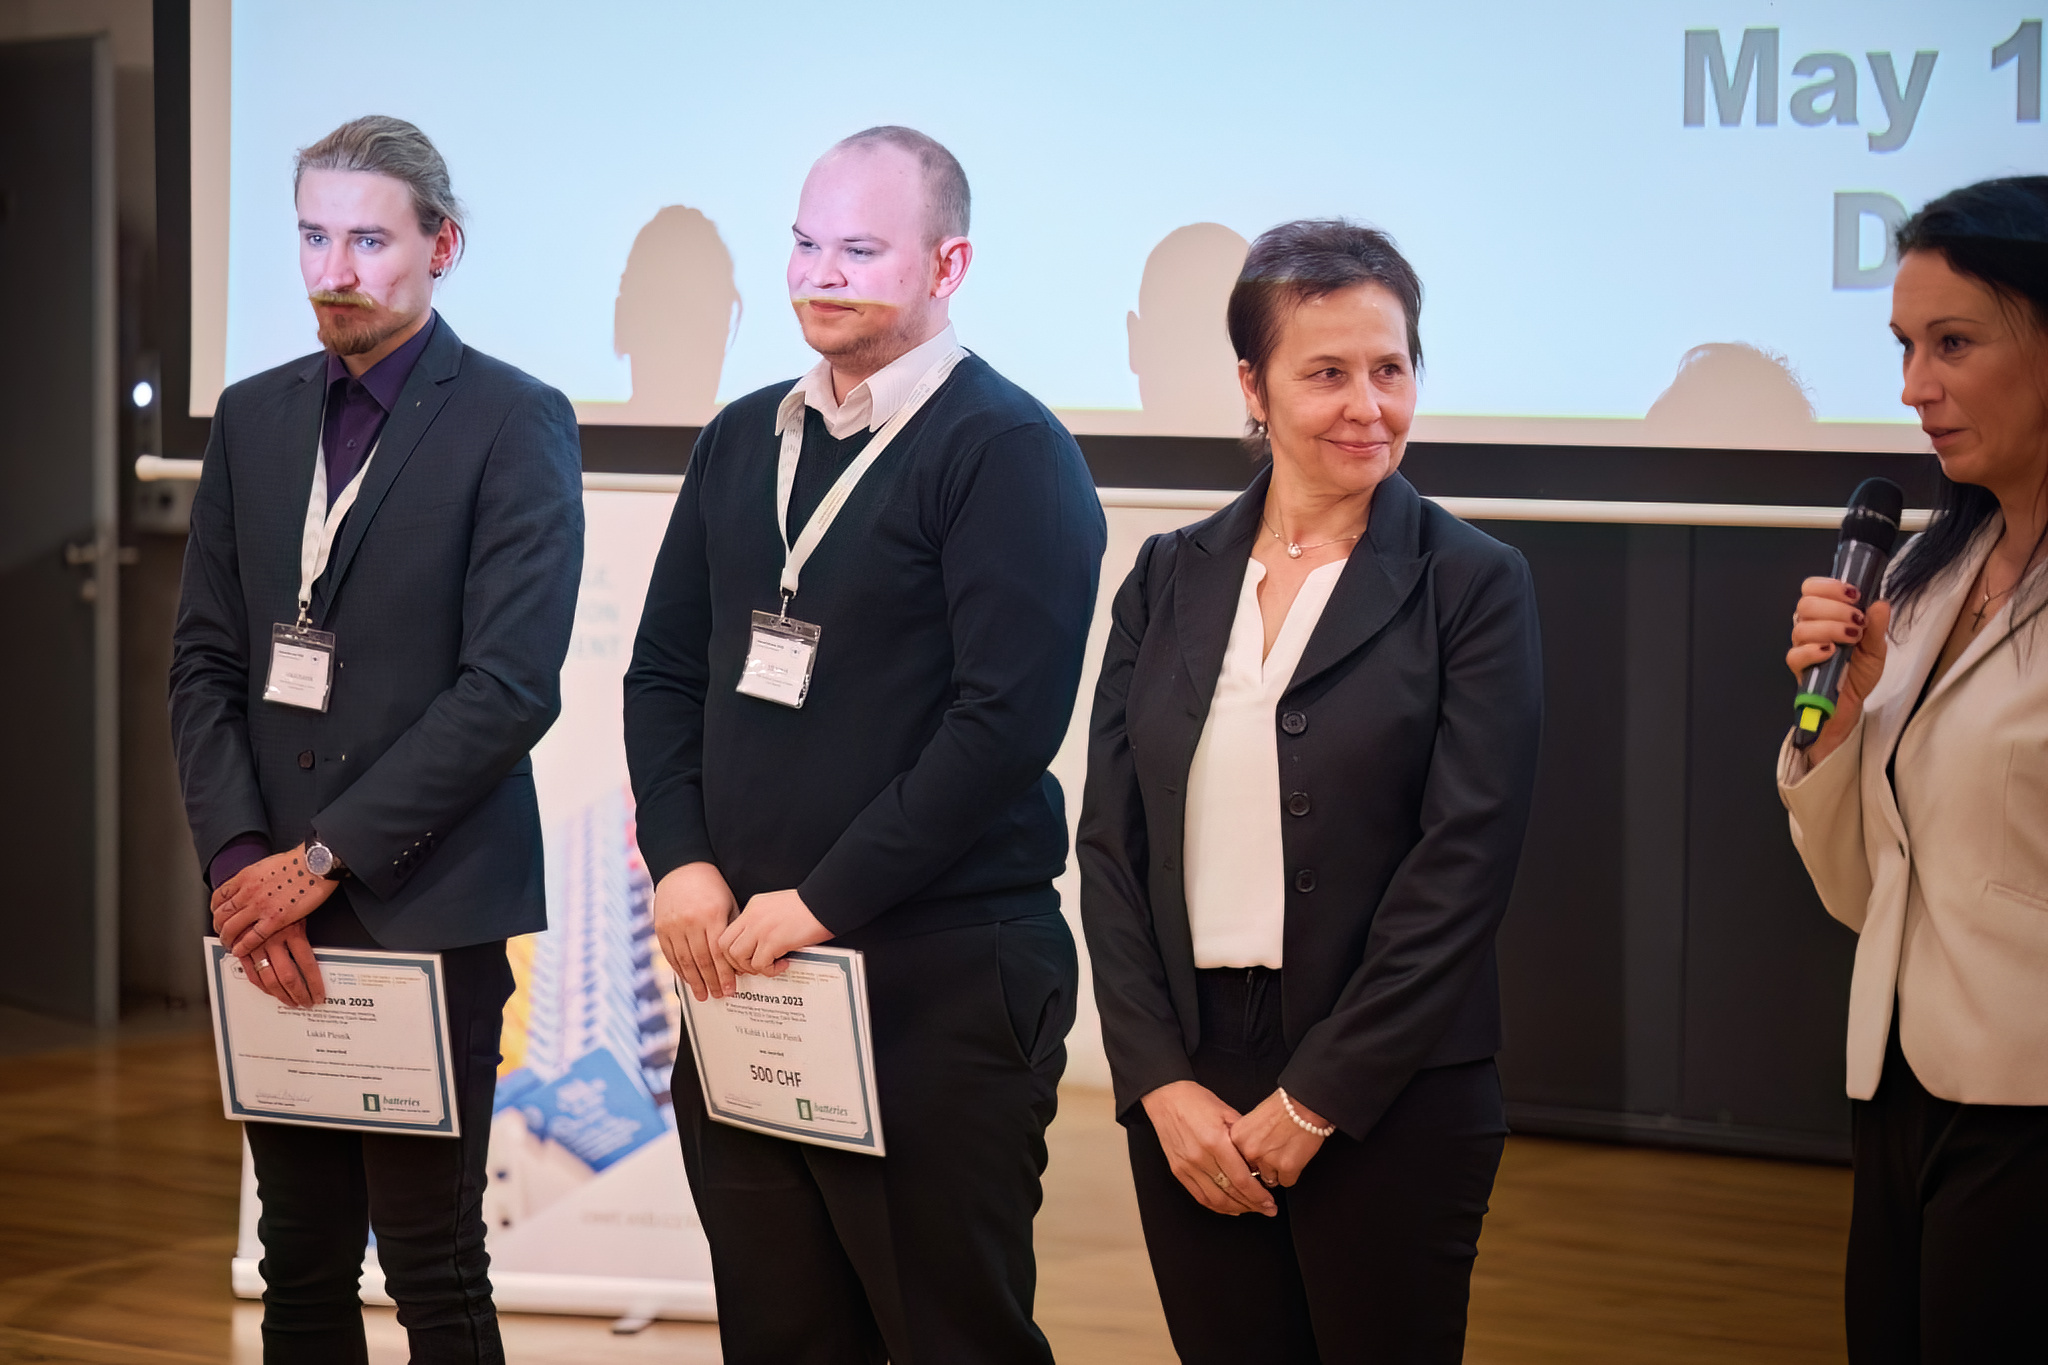 The award is awarded by the Director of CNT Prof. Plachá and Prof. Simha Martynková.